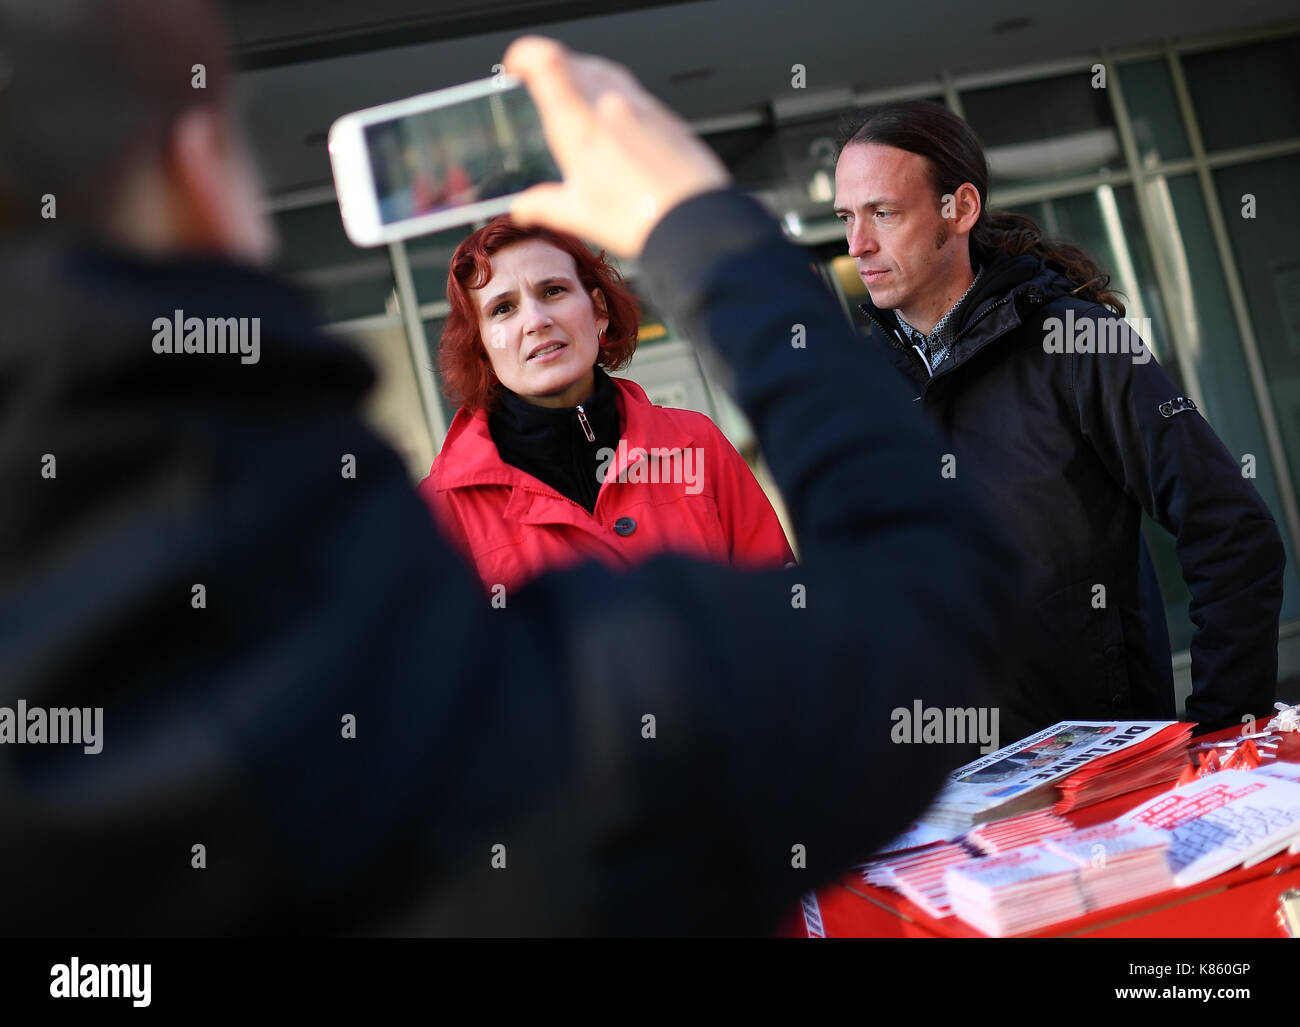 Berlin, Germany. 18th Sep, 2017. Katja Kipling, the leader of Die Linke  (Left Party), with the party's candidate in the borough of  Friedrichshain-Kreuzberg Pascal Meisner on the campaign trail in Berlin,  Germany,